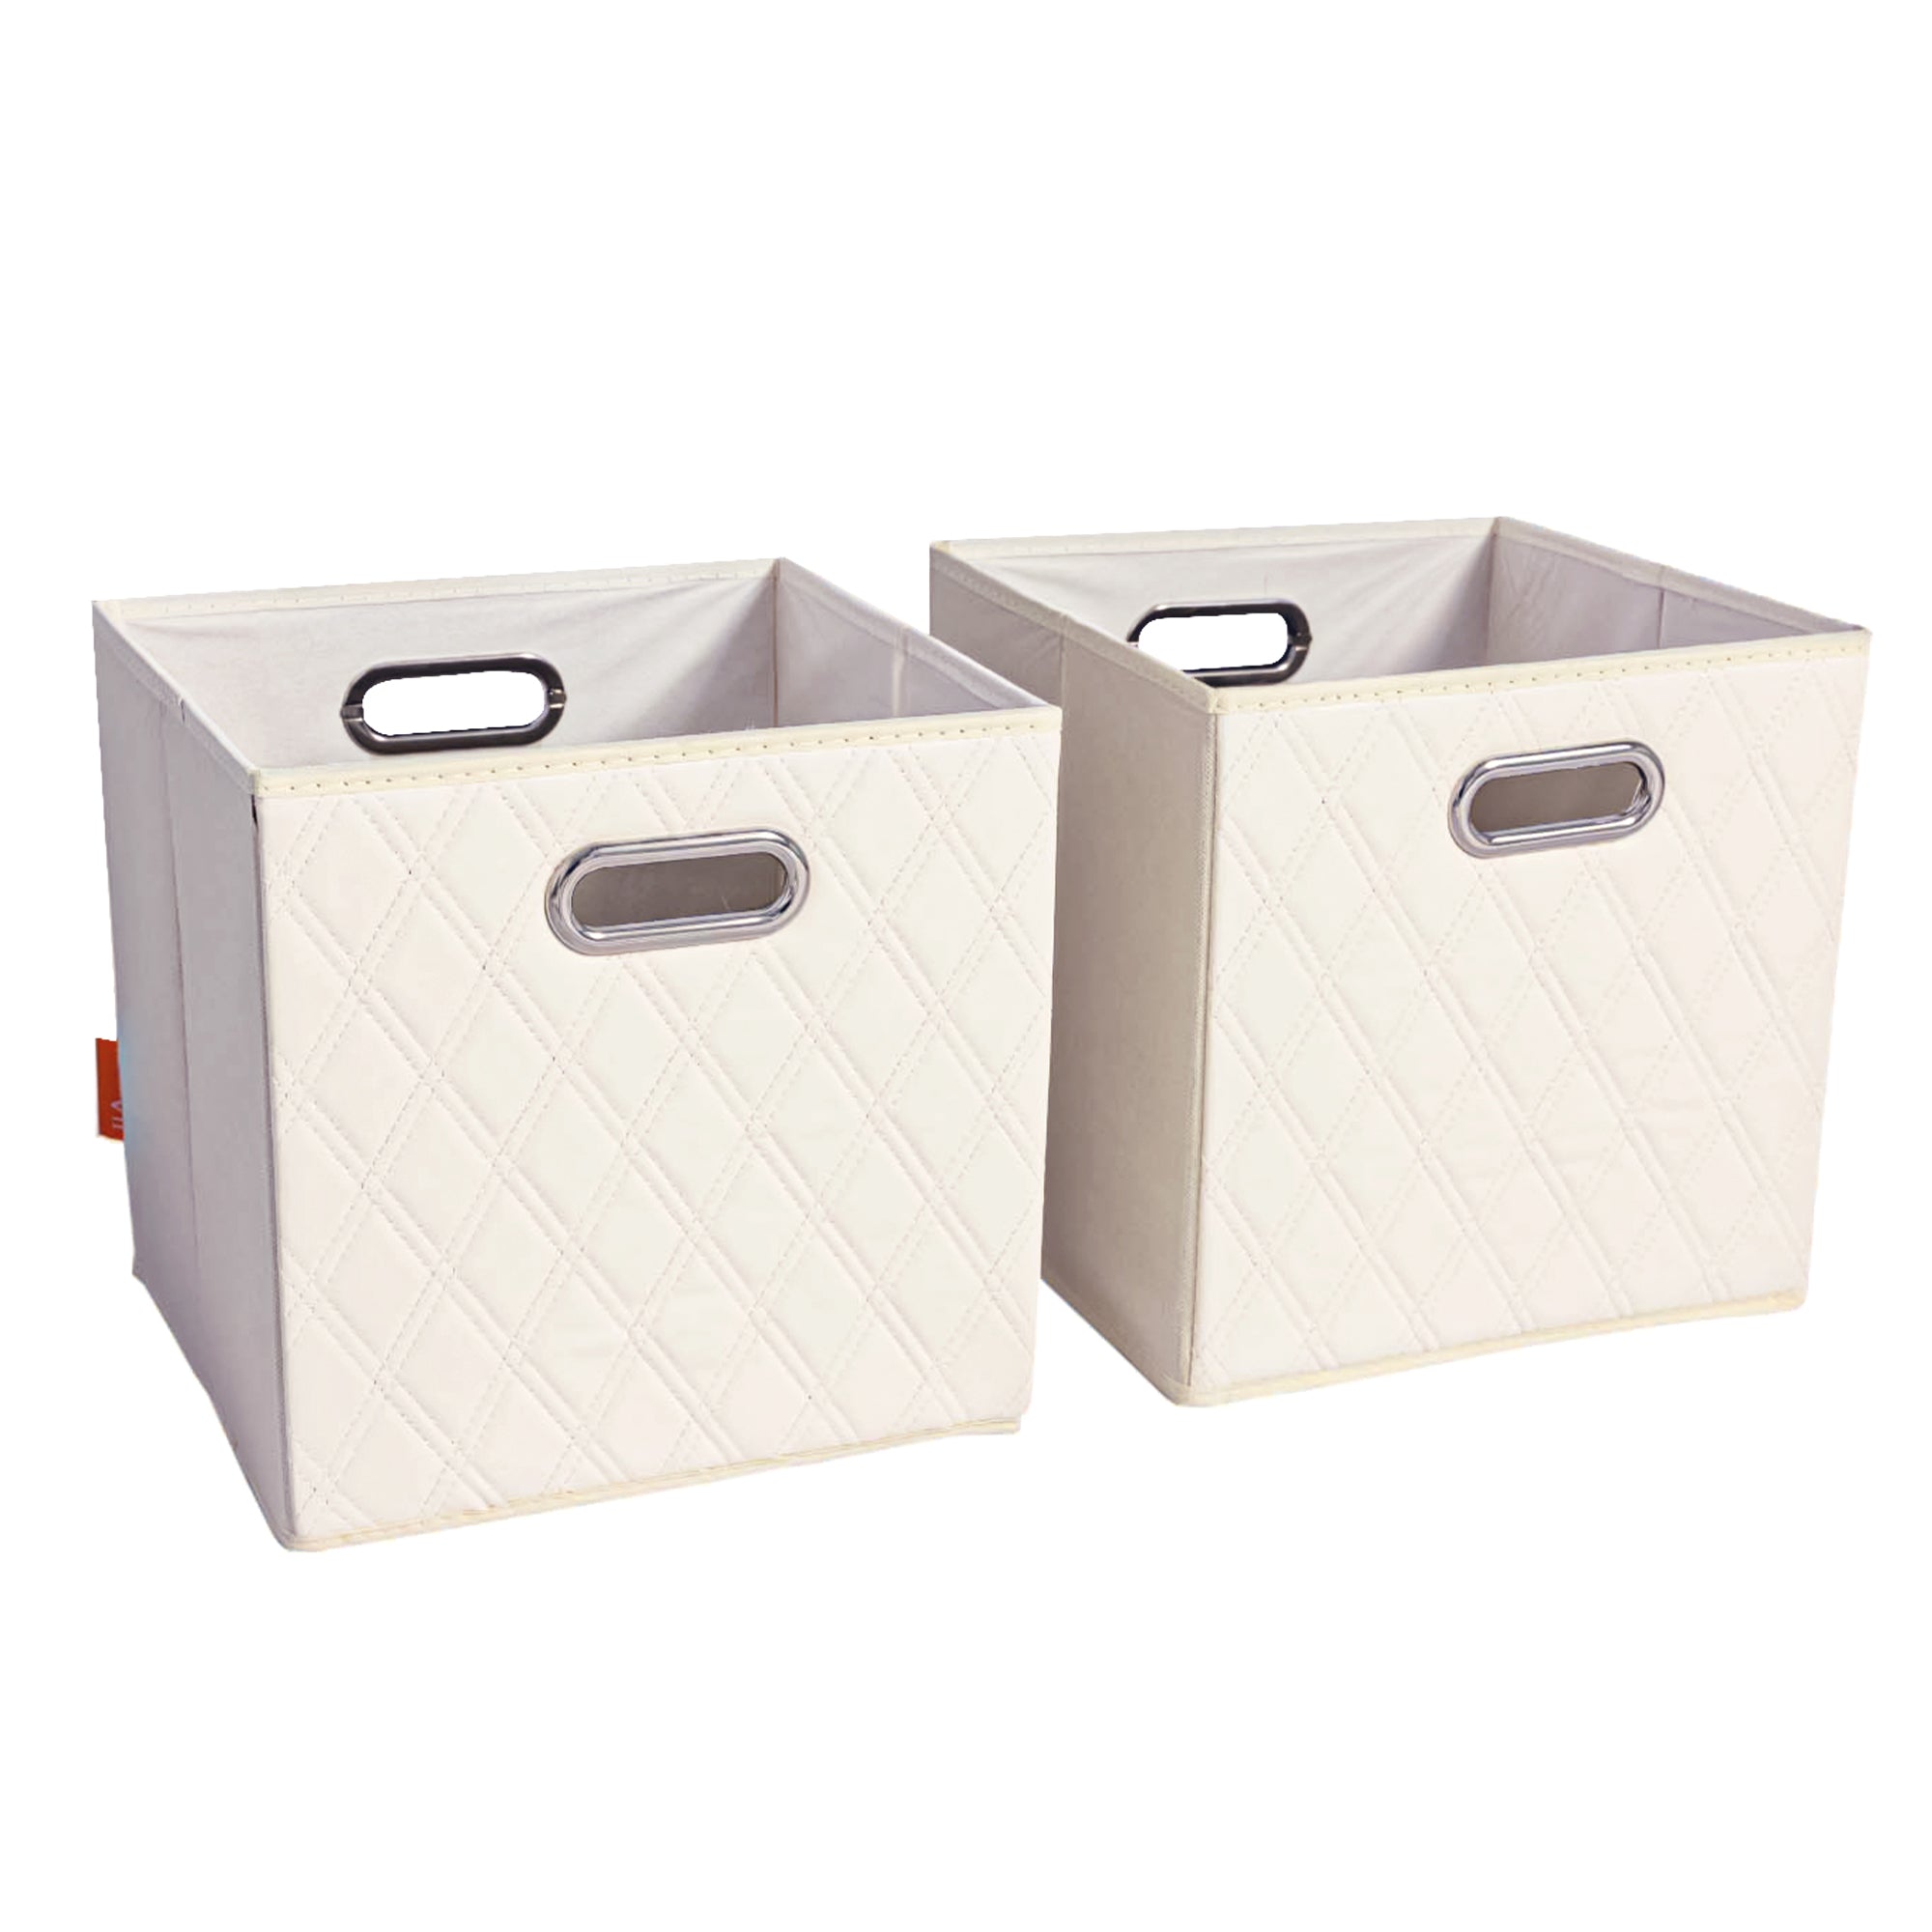 JIAessentials 12 inch Foldable Diamond Patterned Faux Leather Storage Cube Bins Set of Two with Dual Handles - 12" Beige